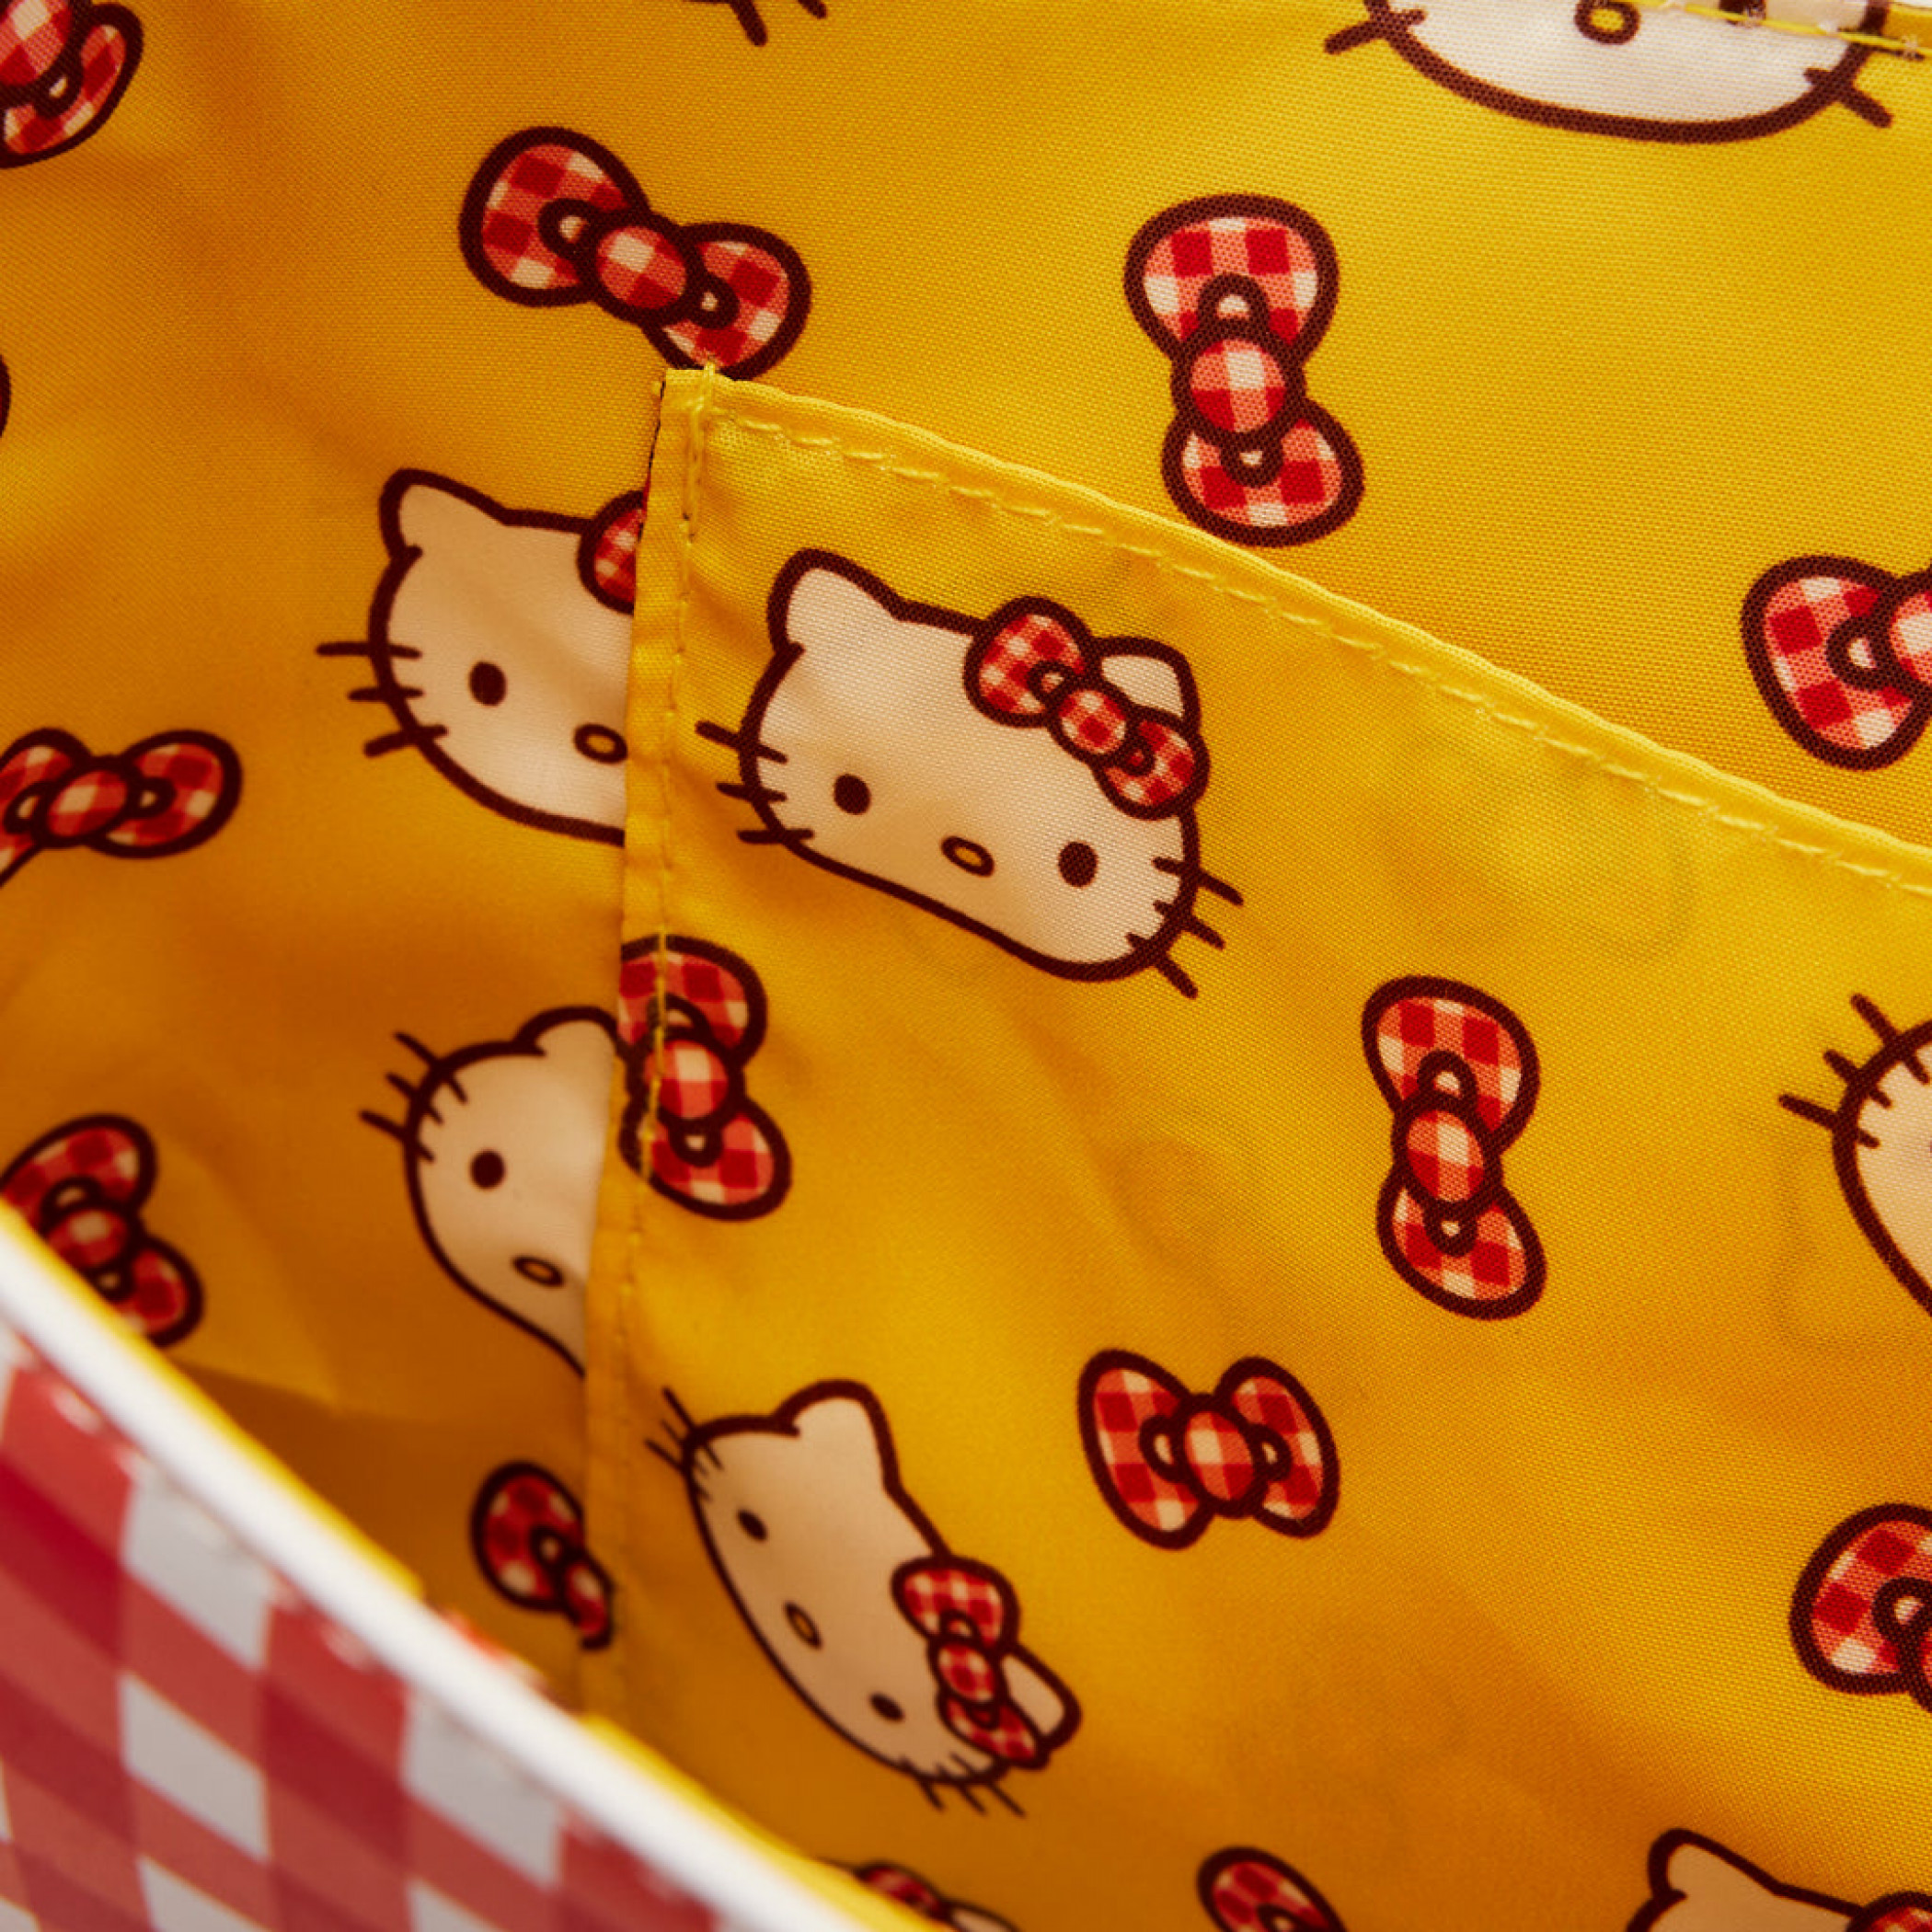 Hello Kitty Sanrio Picnic Time Crossbody Bag by Loungefly